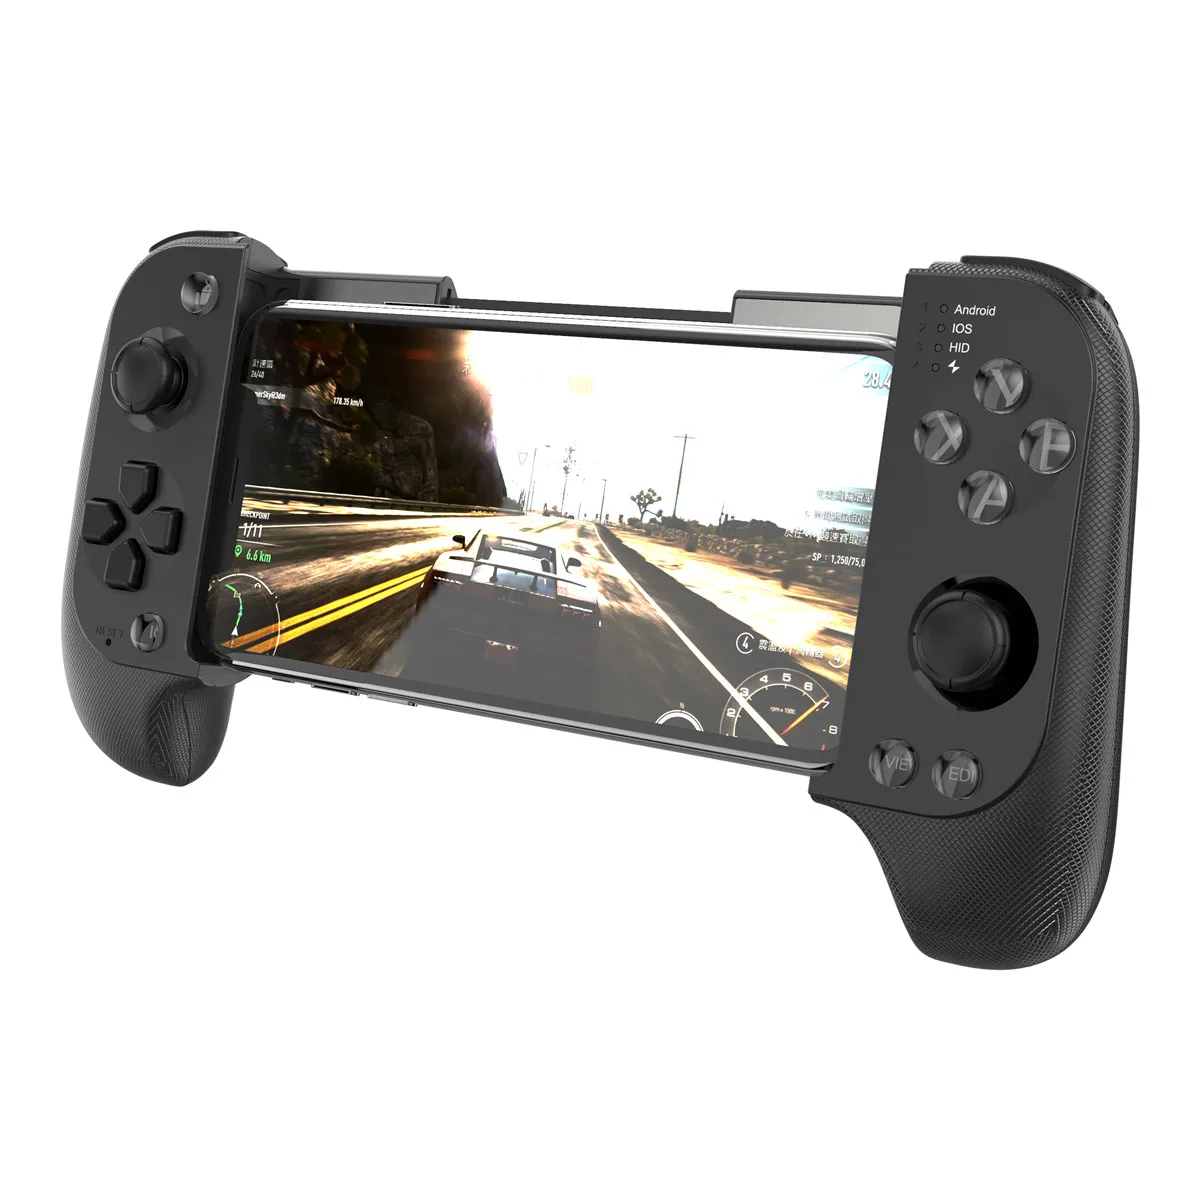 Wapenstilstand kanaal concept Saitake 7007f1 Wireless Gamepad For Huawei Xiaomi Android Phone Tv Iphone  Telescopic Game Controller Gamepads Joystick - Buy Wireless Gamepad,Game  Controller,Gamepad For Android Product on Alibaba.com